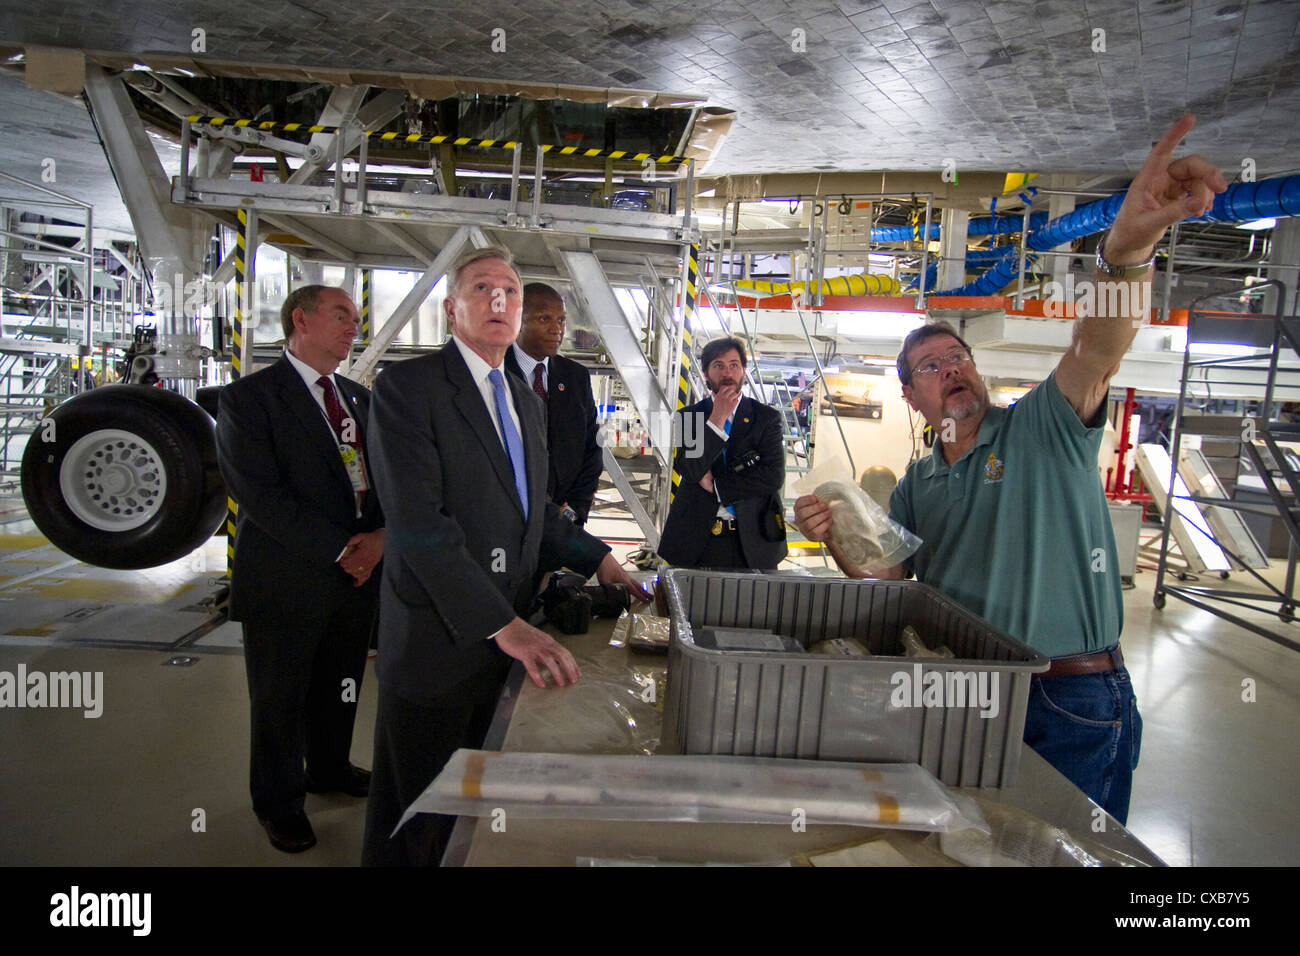 Secretary of the Navy, the Honorable Ray Mabus, stands underneath the space shuttle Atlantis during a tour of the NASA Orbiter Processing Facility at Kennedy Space Center. Stock Photo